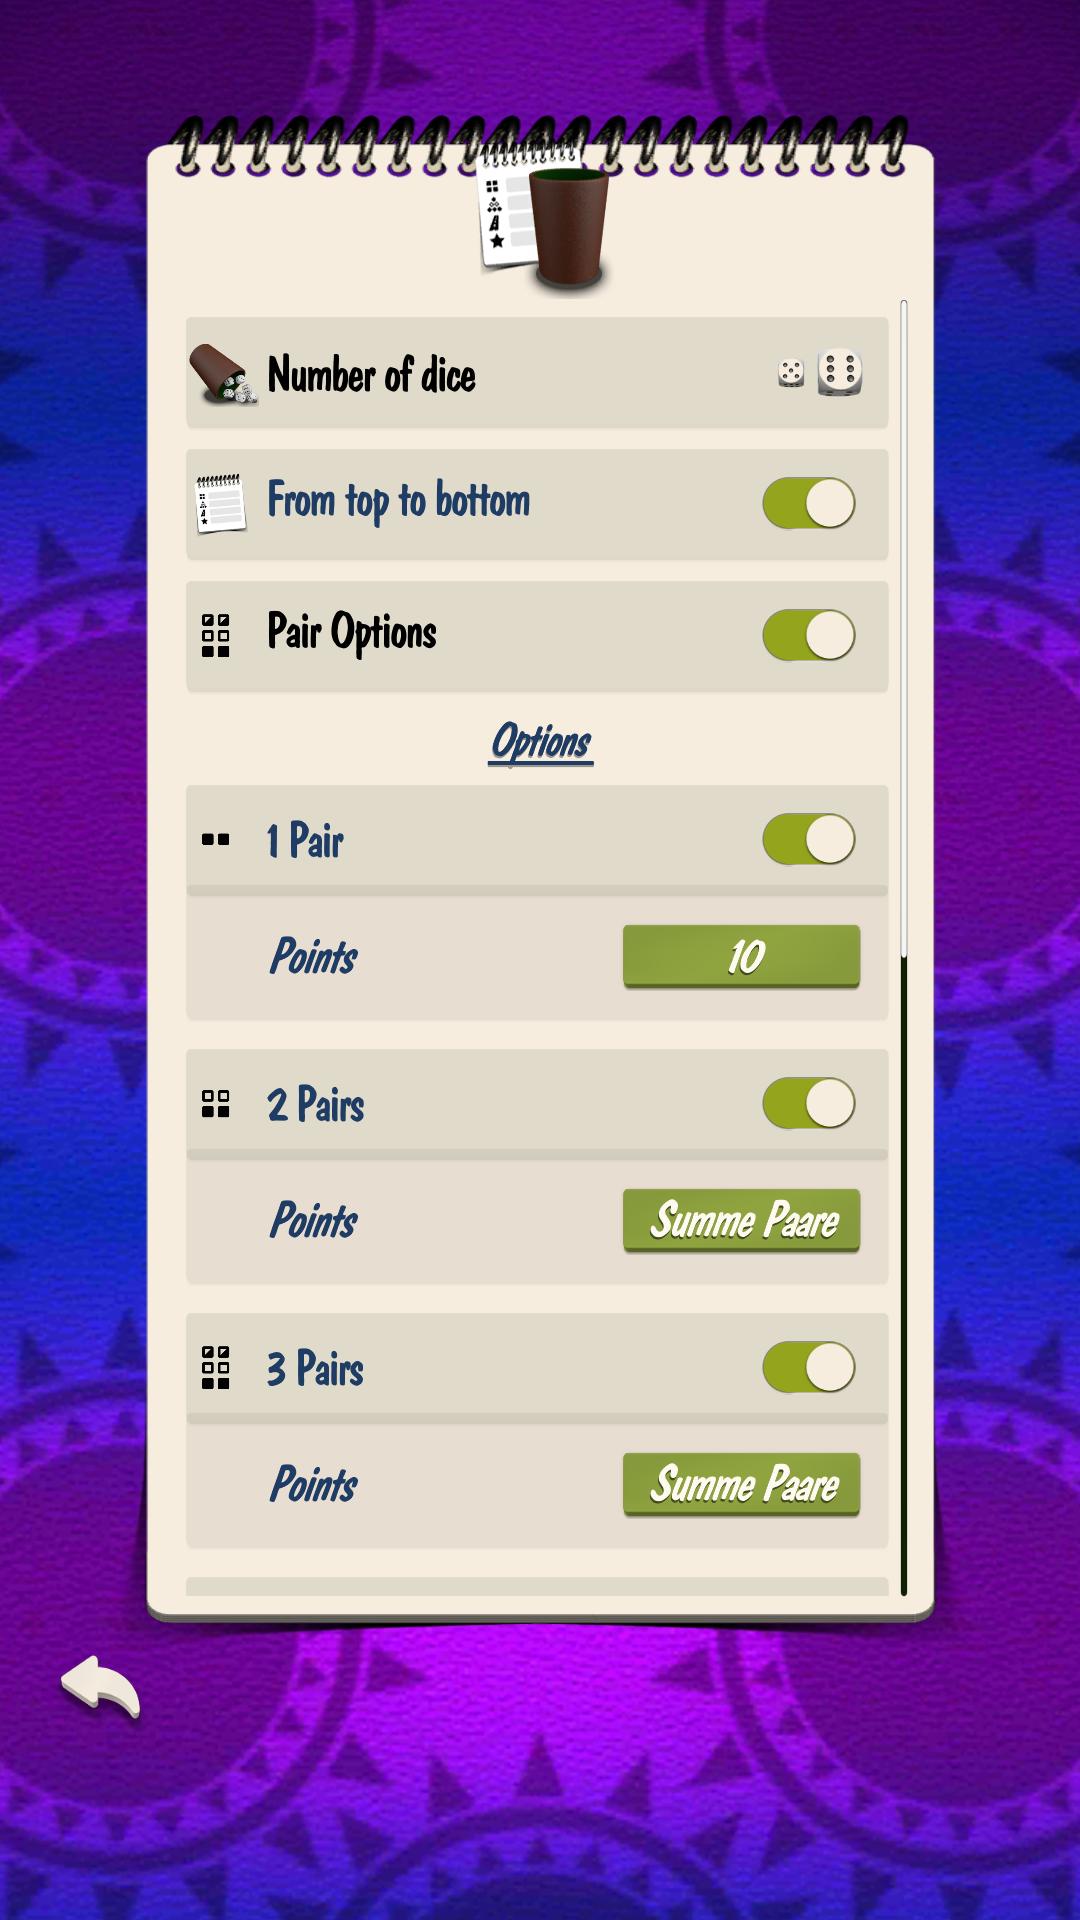 Yatzy Offline and Online - free dice game 3.3.4 Screenshot 6